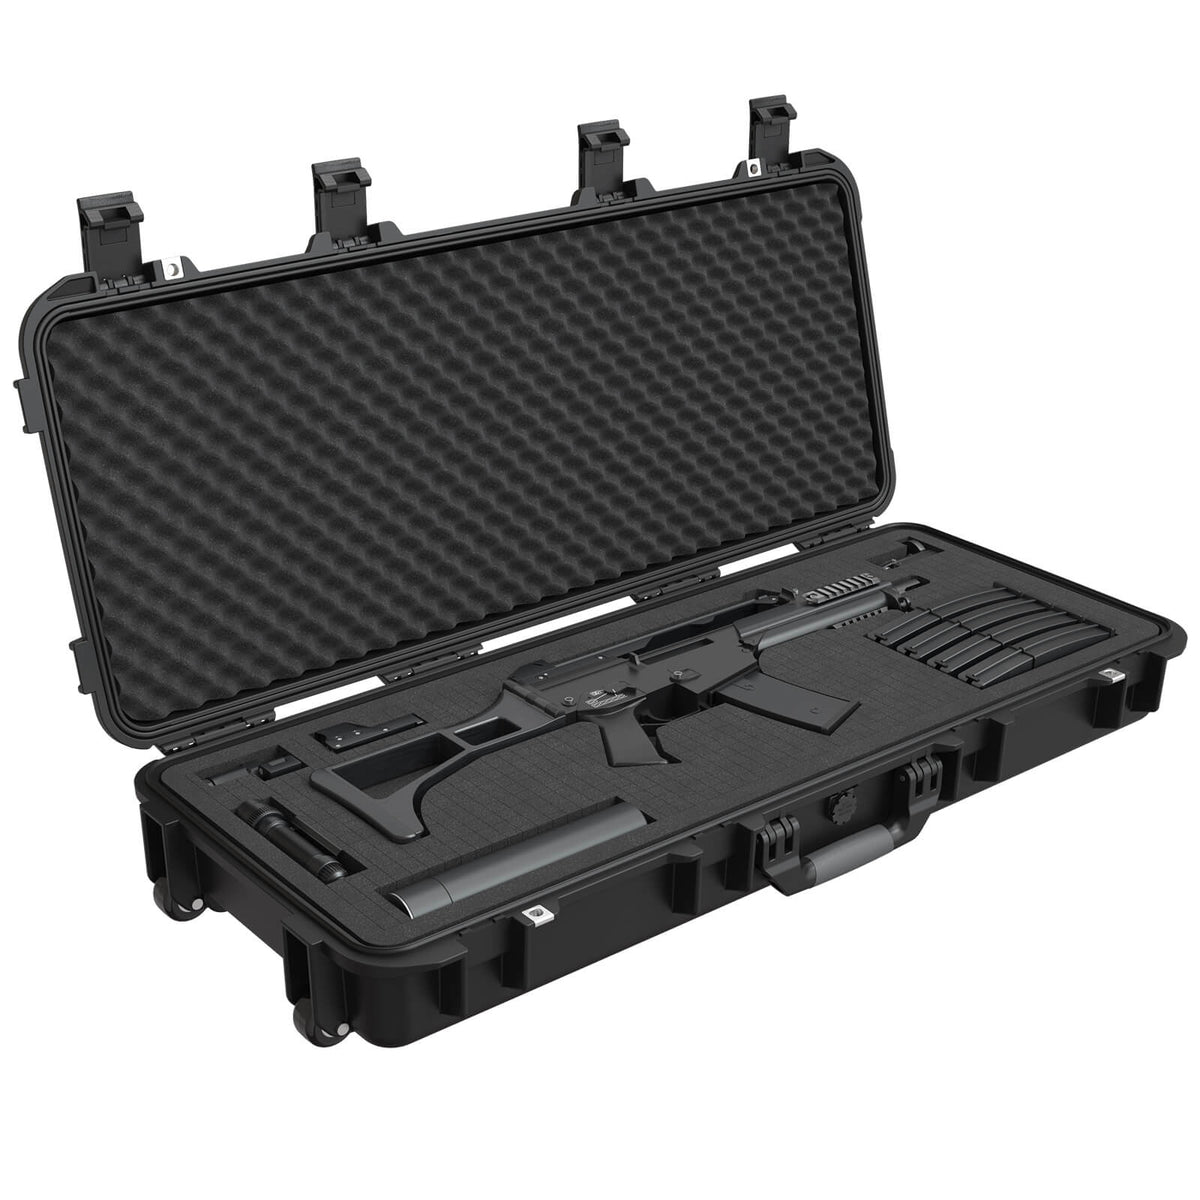 RPNB PP-91139 Weatherproof Hard Rifle Case with Customizable Foam Insert Open with Rifle &amp; Accessories